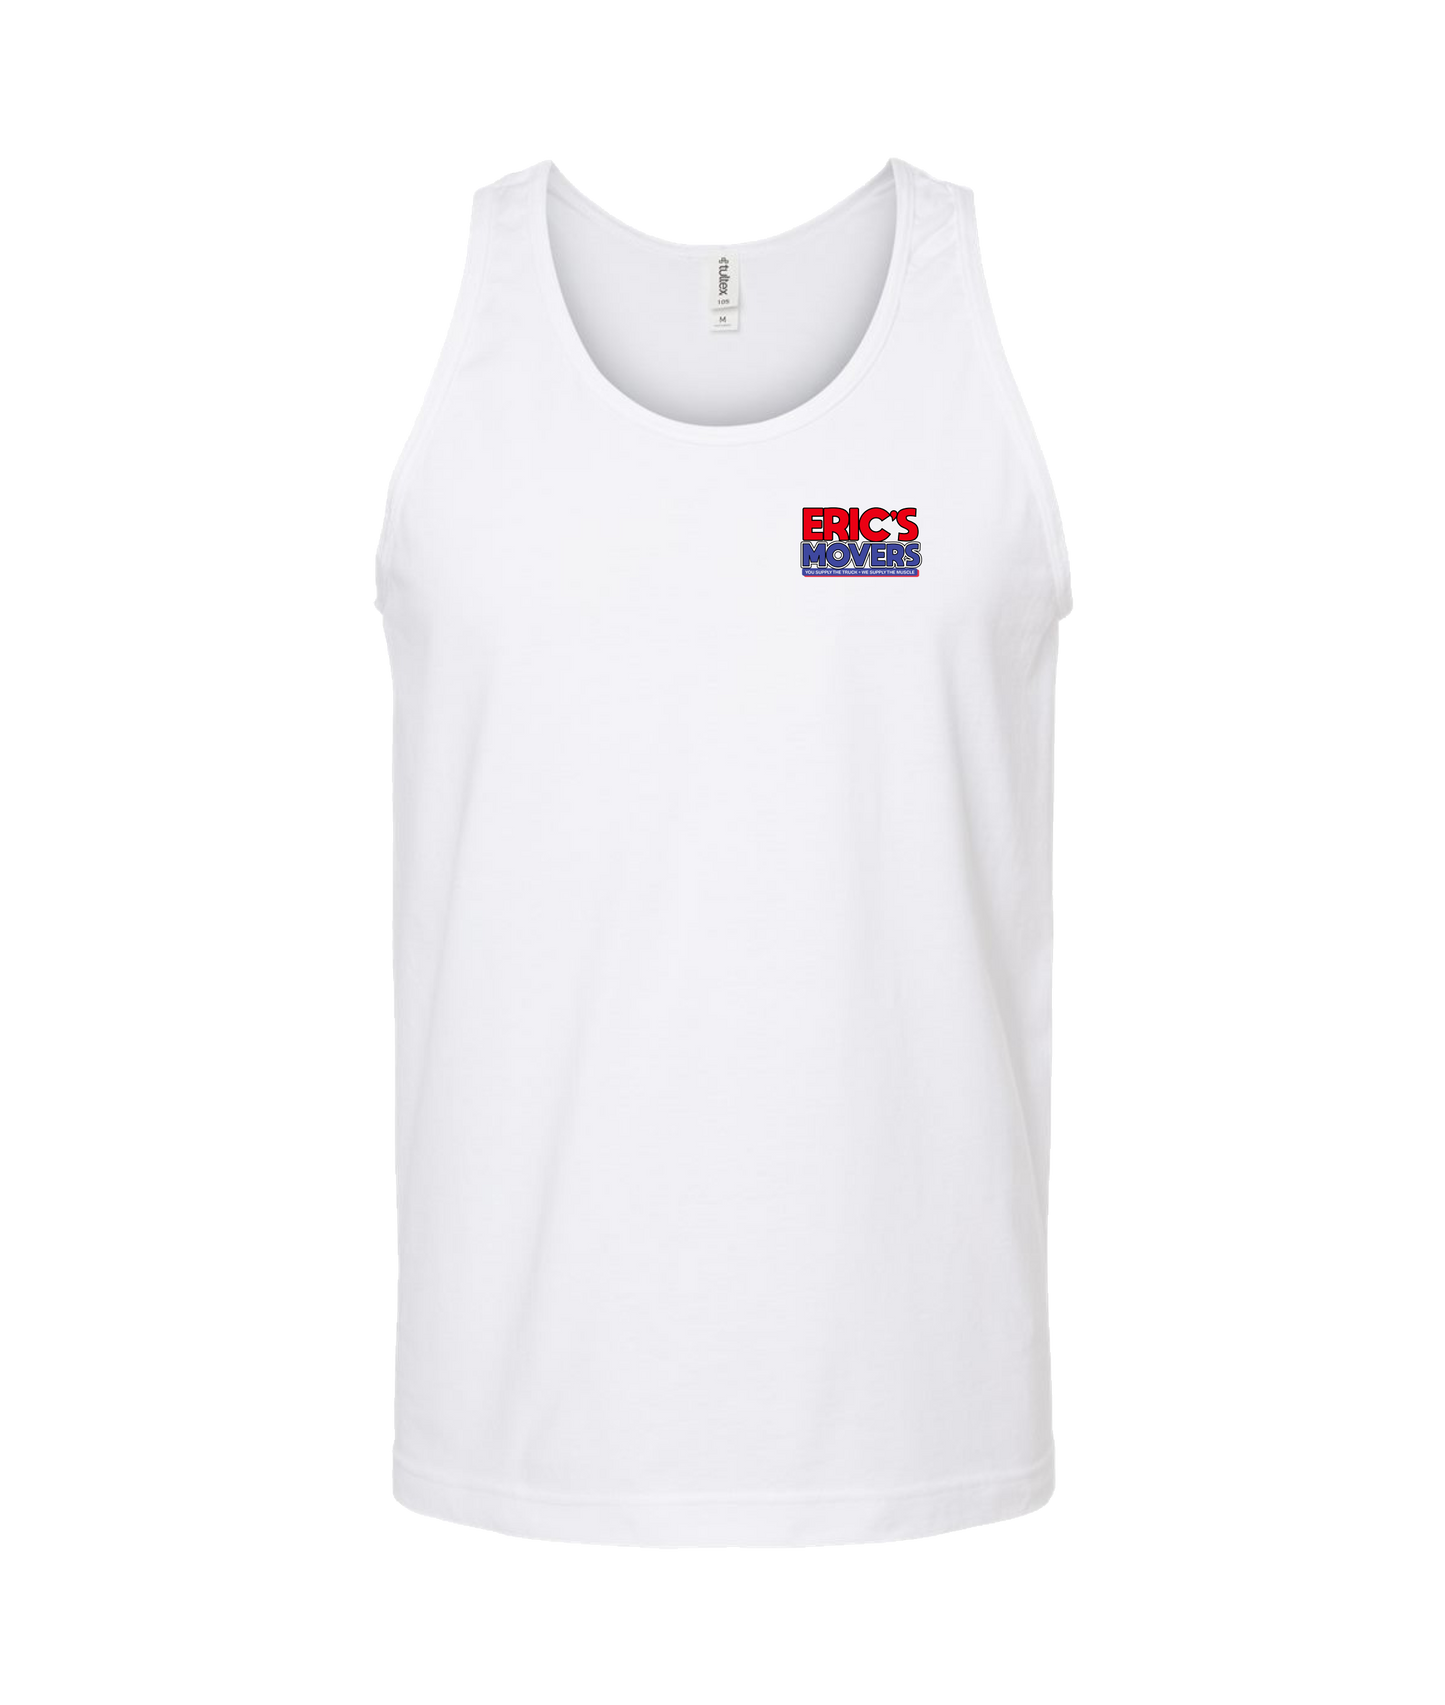 Eric's Movers - $75 an Hour  - White Tank Top